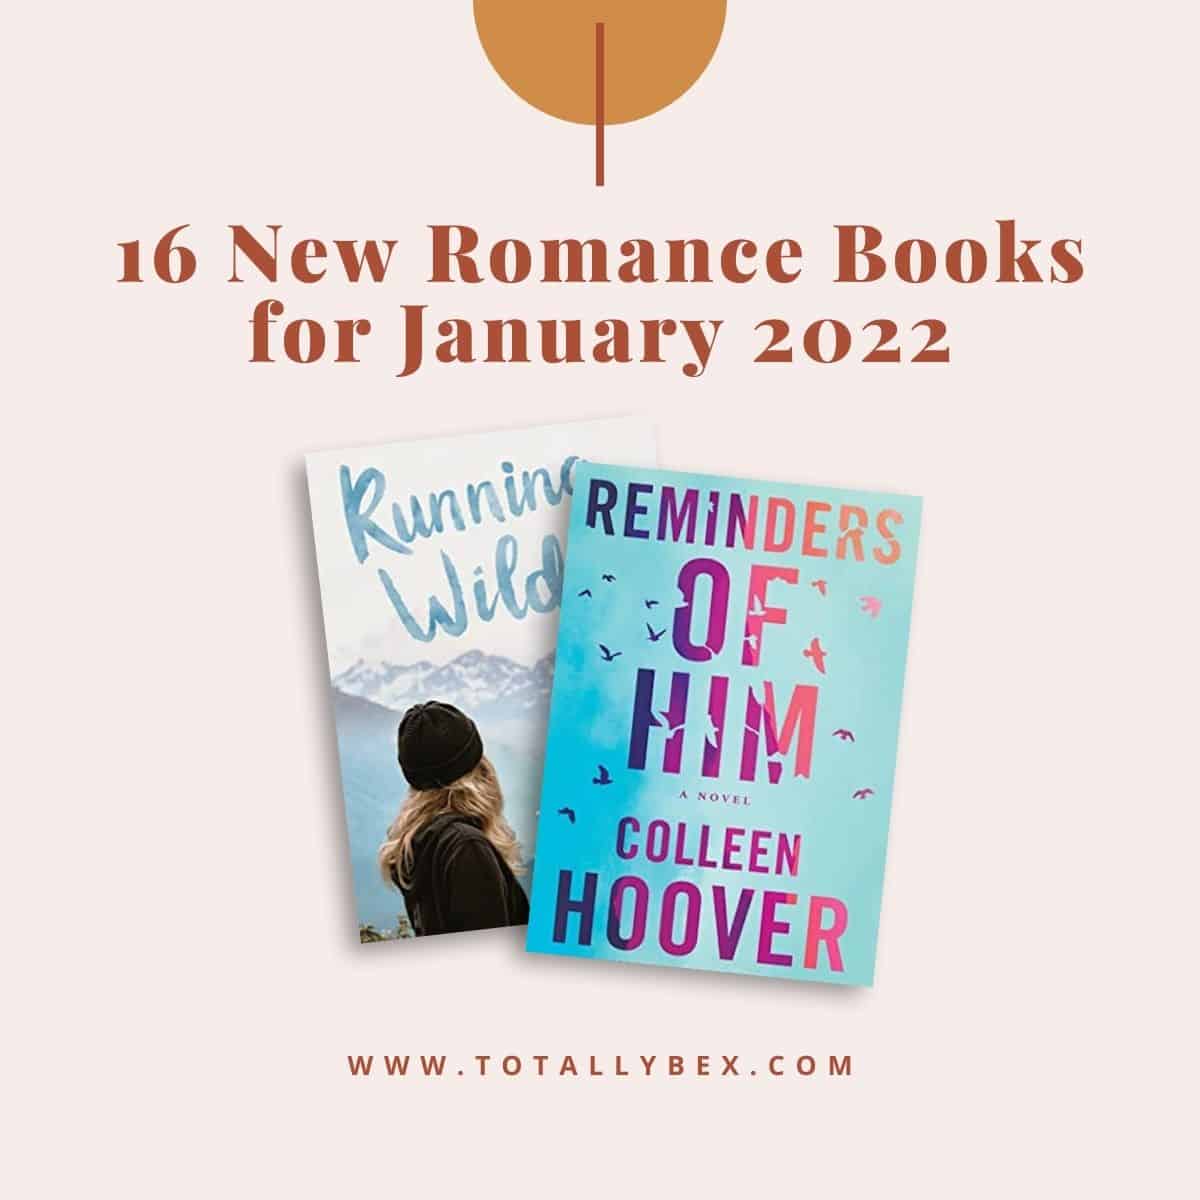 16 New Romance Books for January 2022